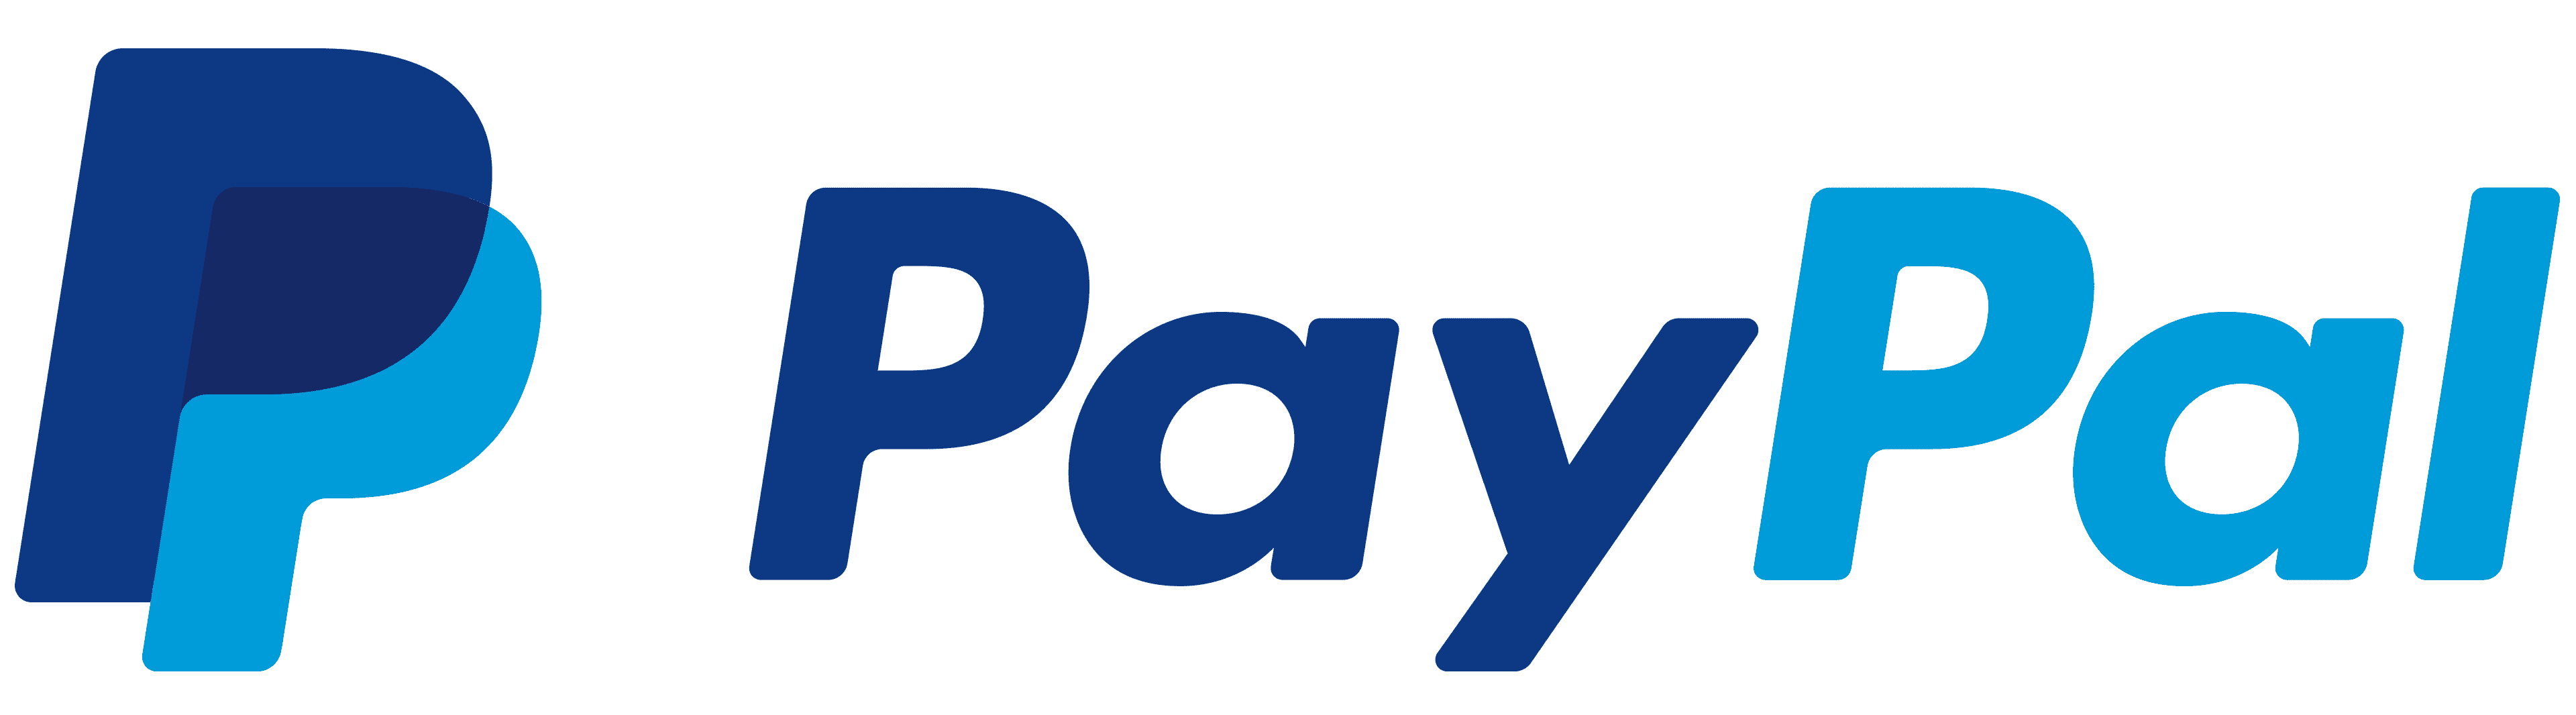 PayPal Donations